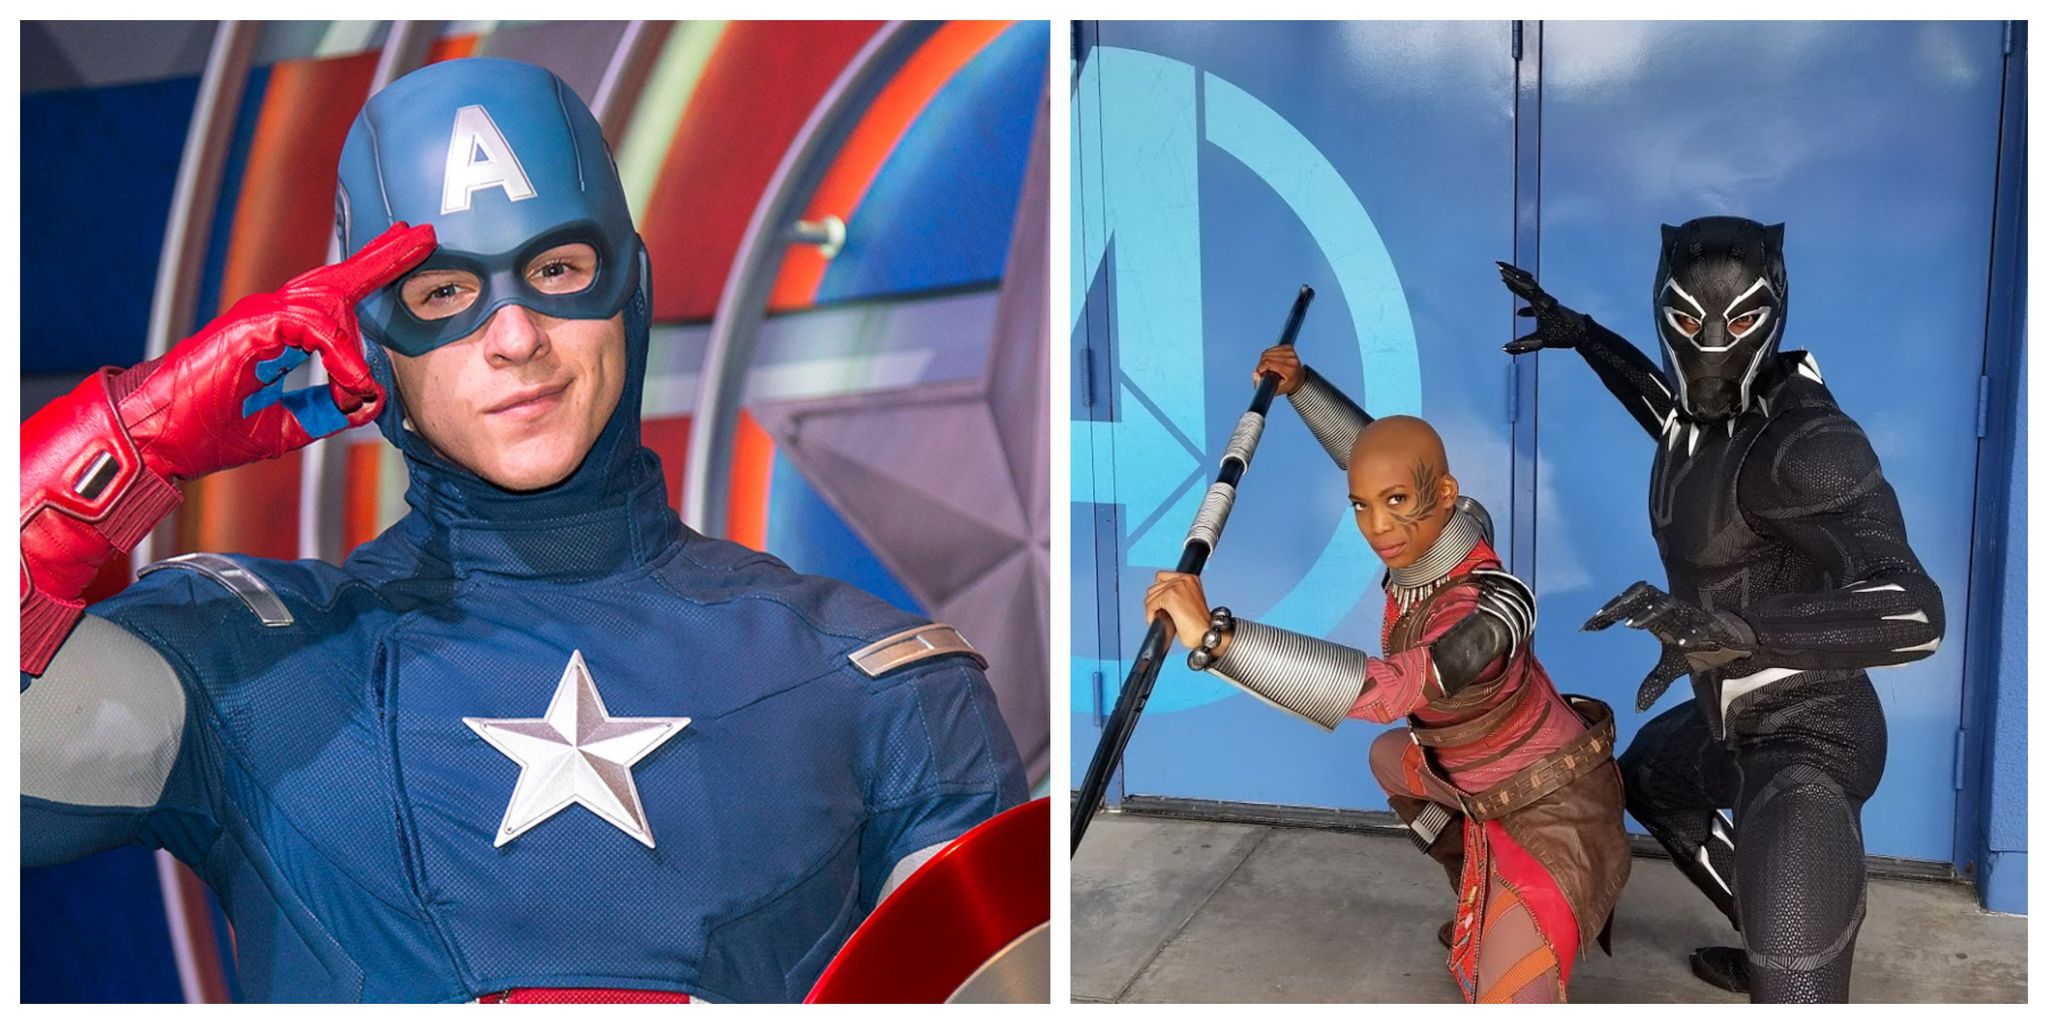 Disneyland is looking for Captain America and Black Panther Stunt performers